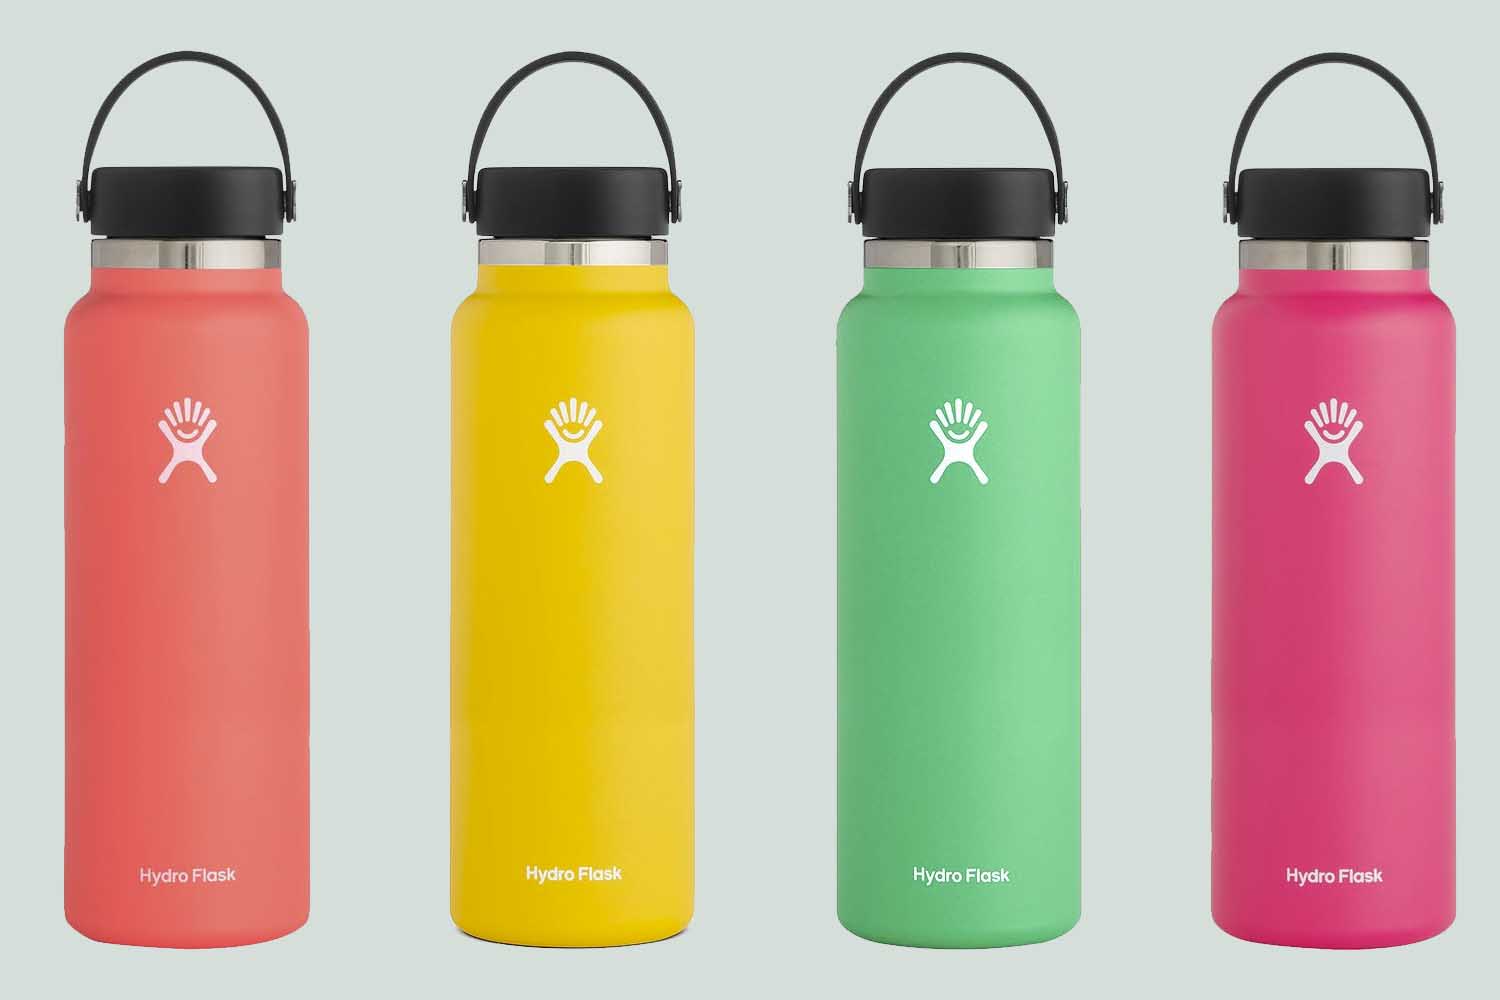 Hydro Flask 40oz water bottles in four bright colors